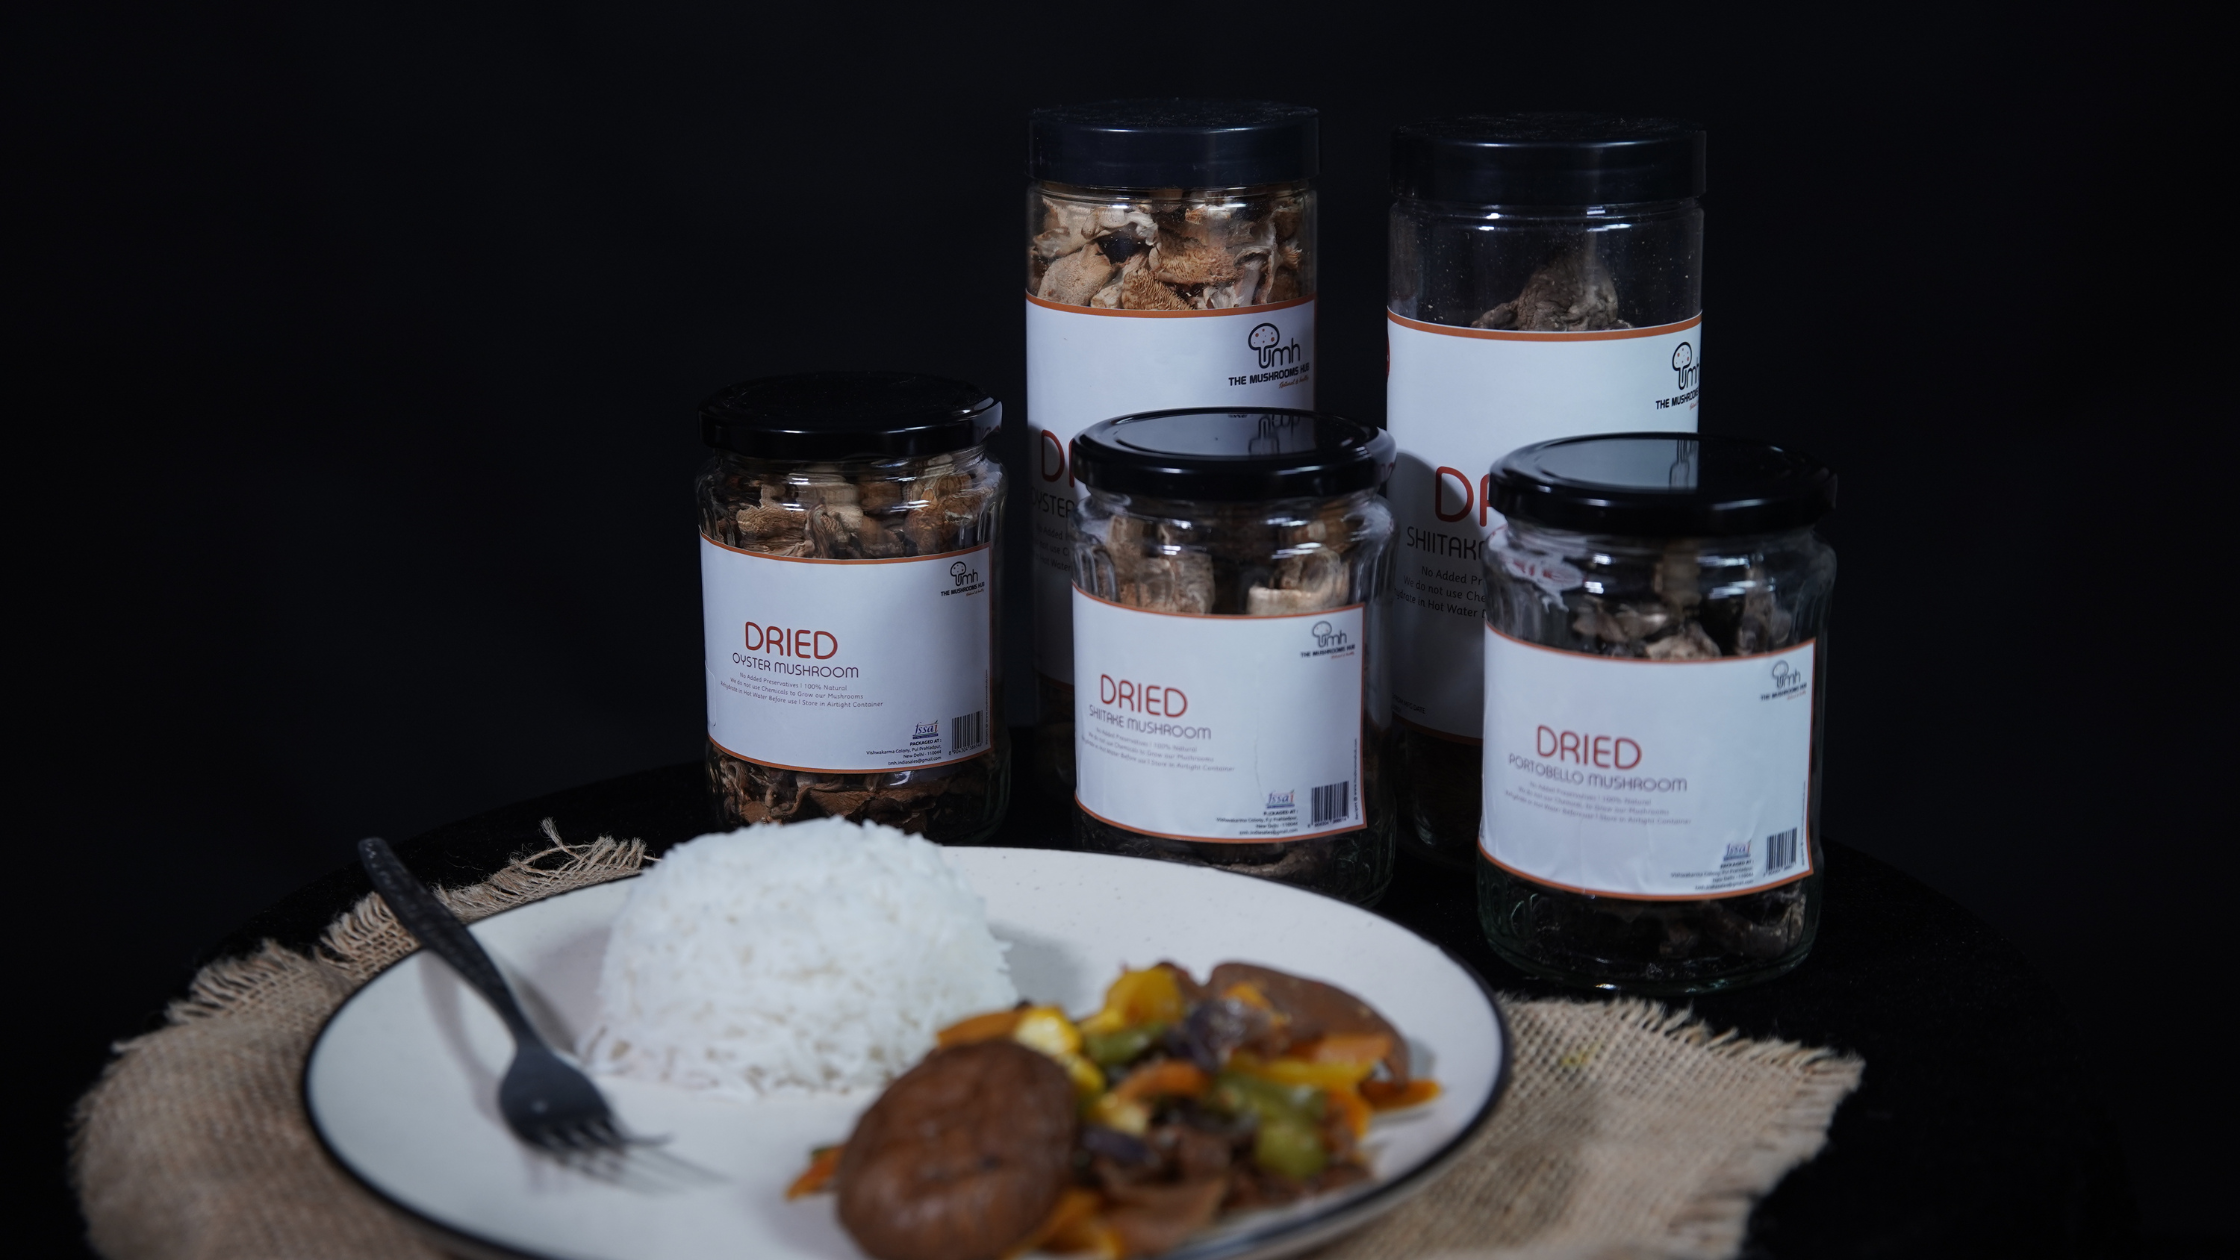 How to store Dried Mushrooms?